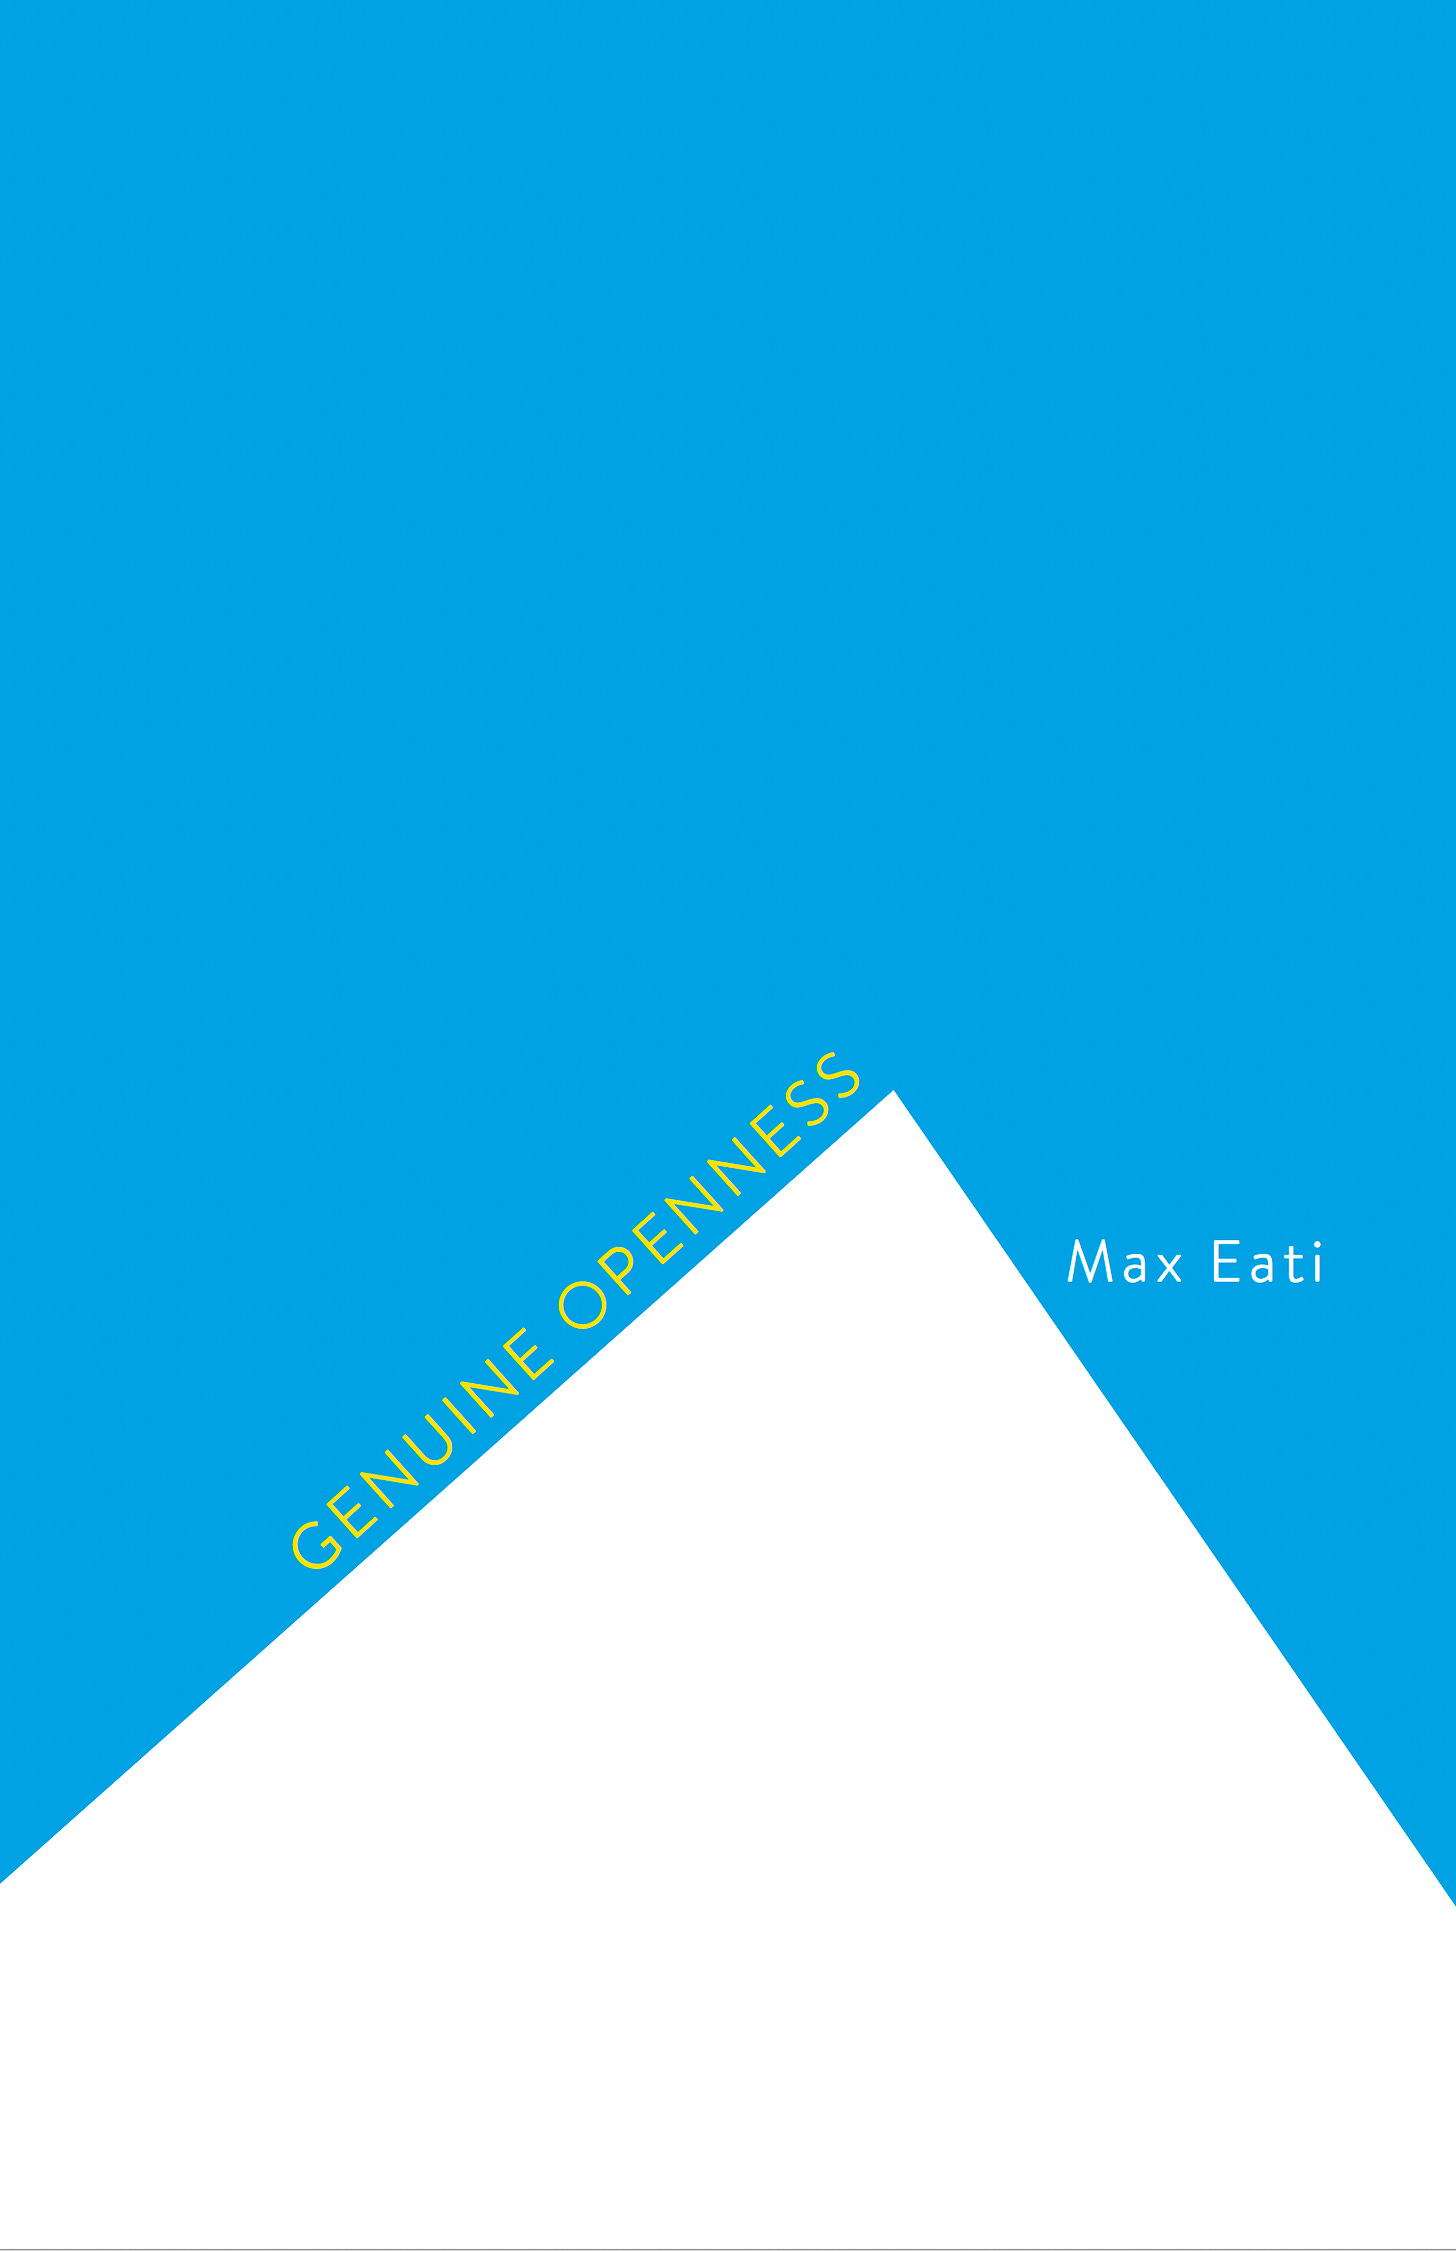 The cover of Max Eati's chapbook Genuine Openness, which features a sharp white mountain rising against a blue sky.